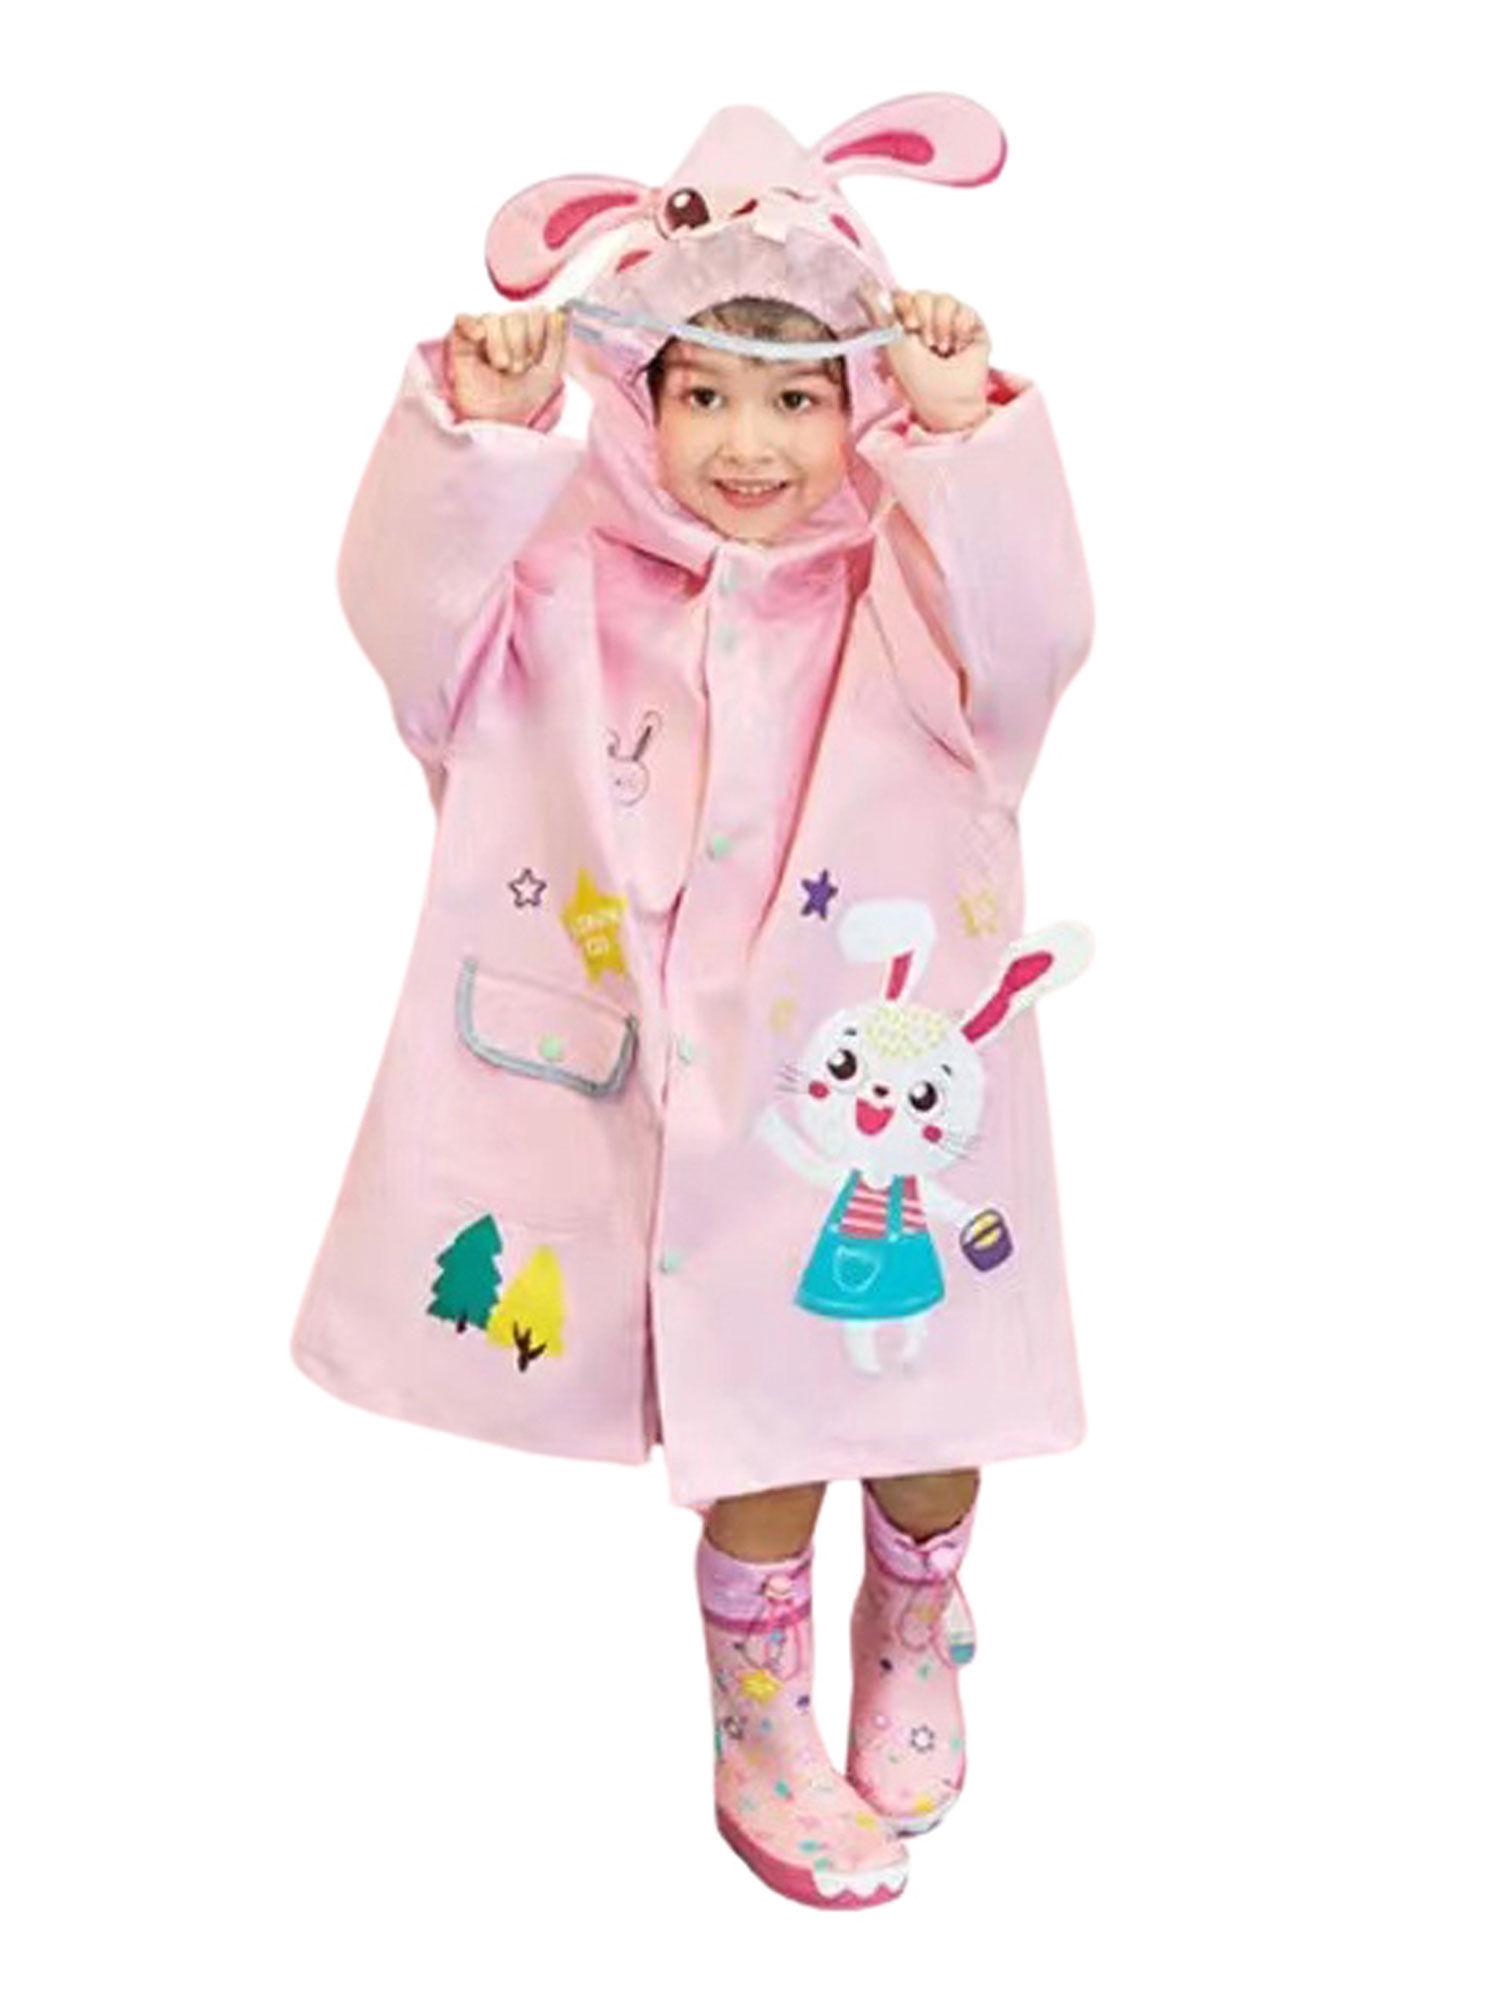 all-over-raincoat-for-kids-mall-baby-pink-rabbit-theme